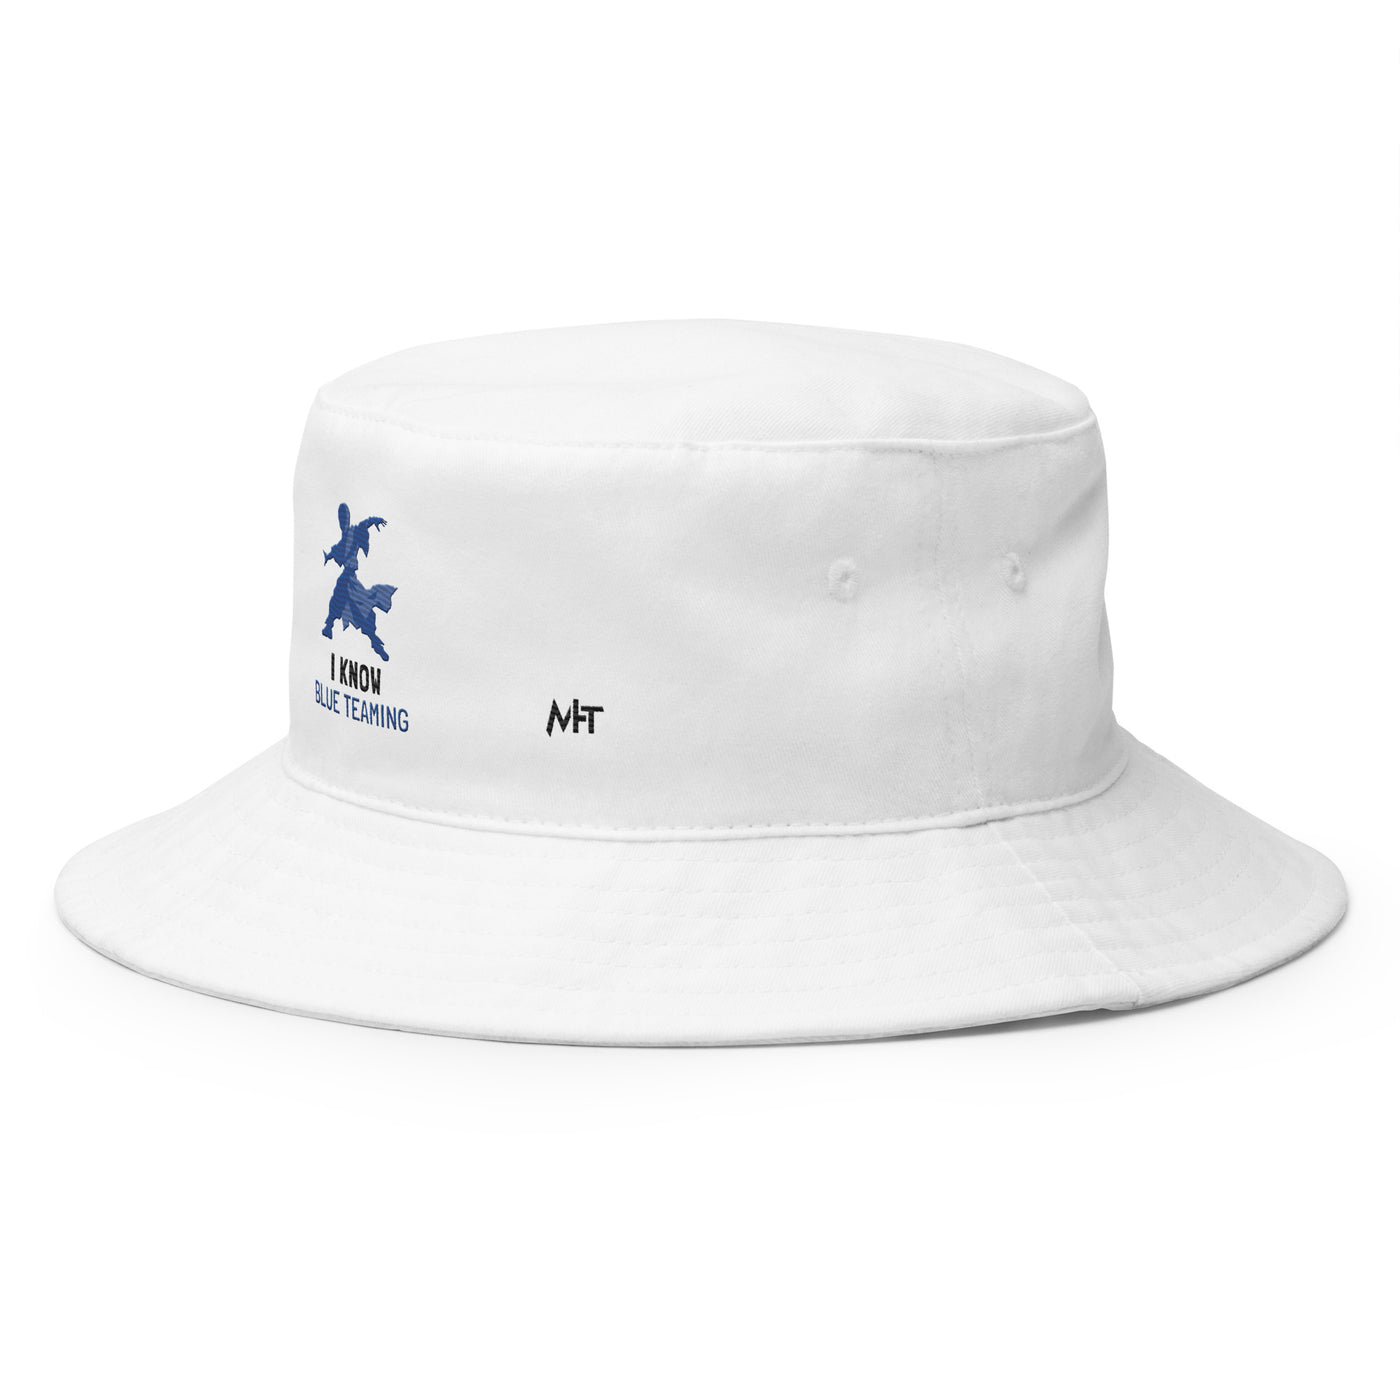 I Know Blue Teaming - Bucket Hat